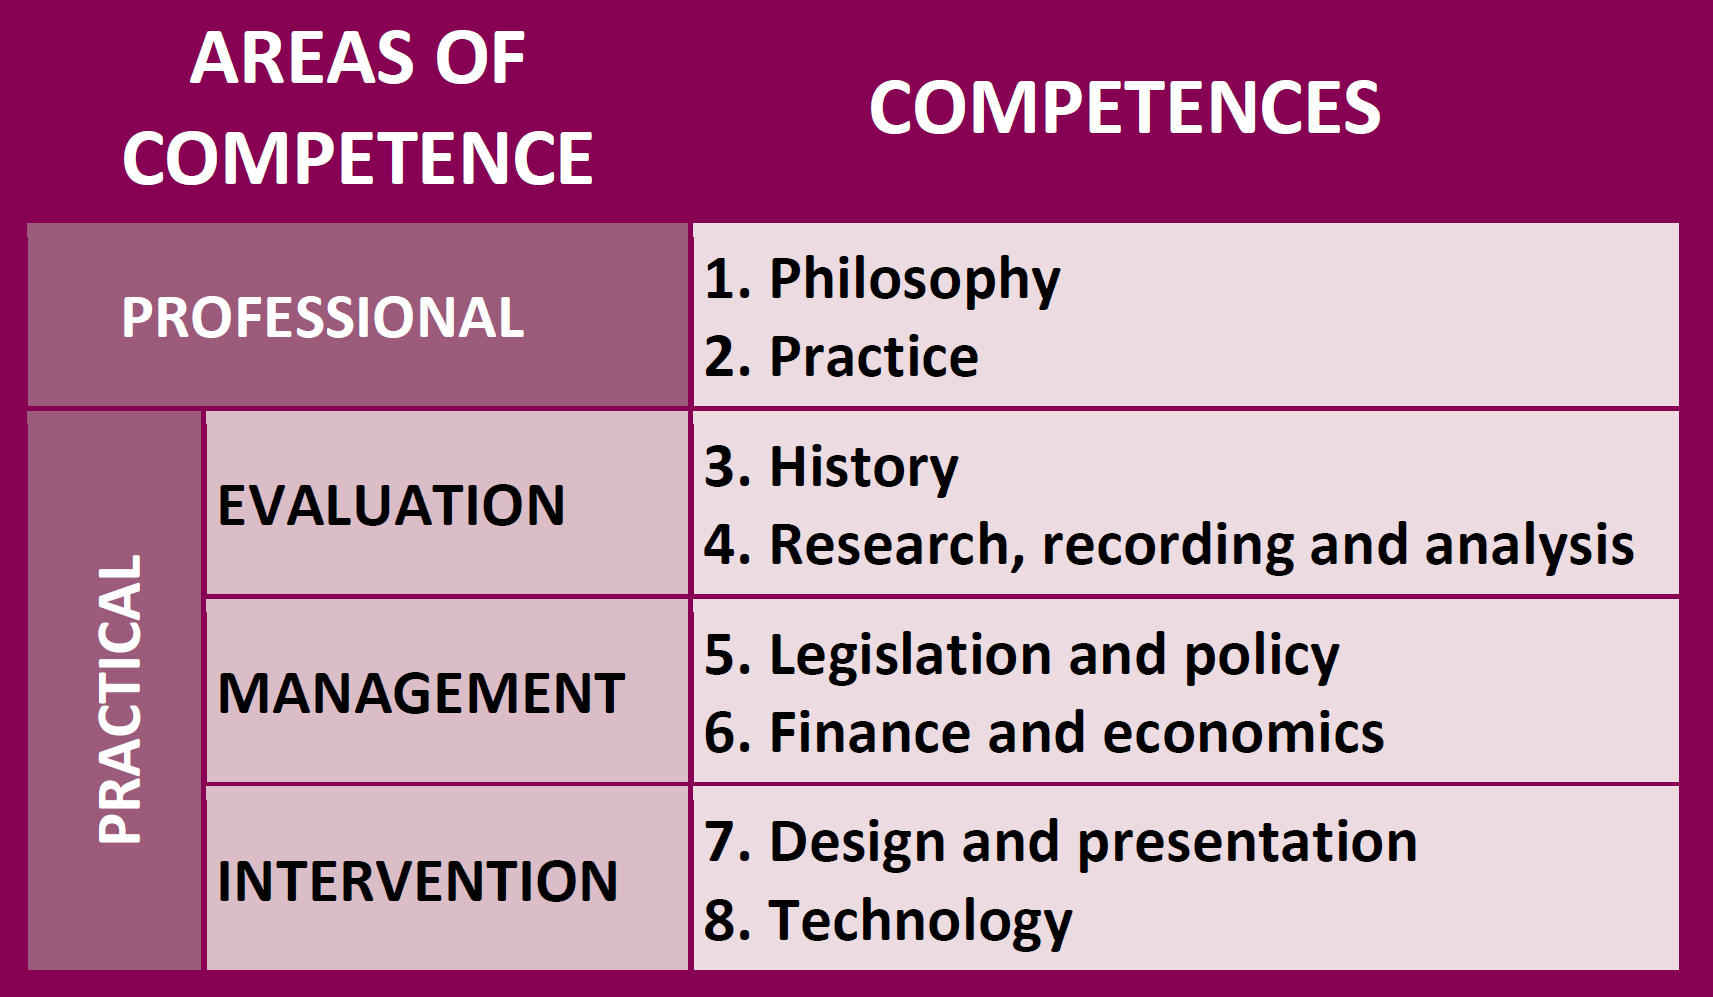 Areas of Competence